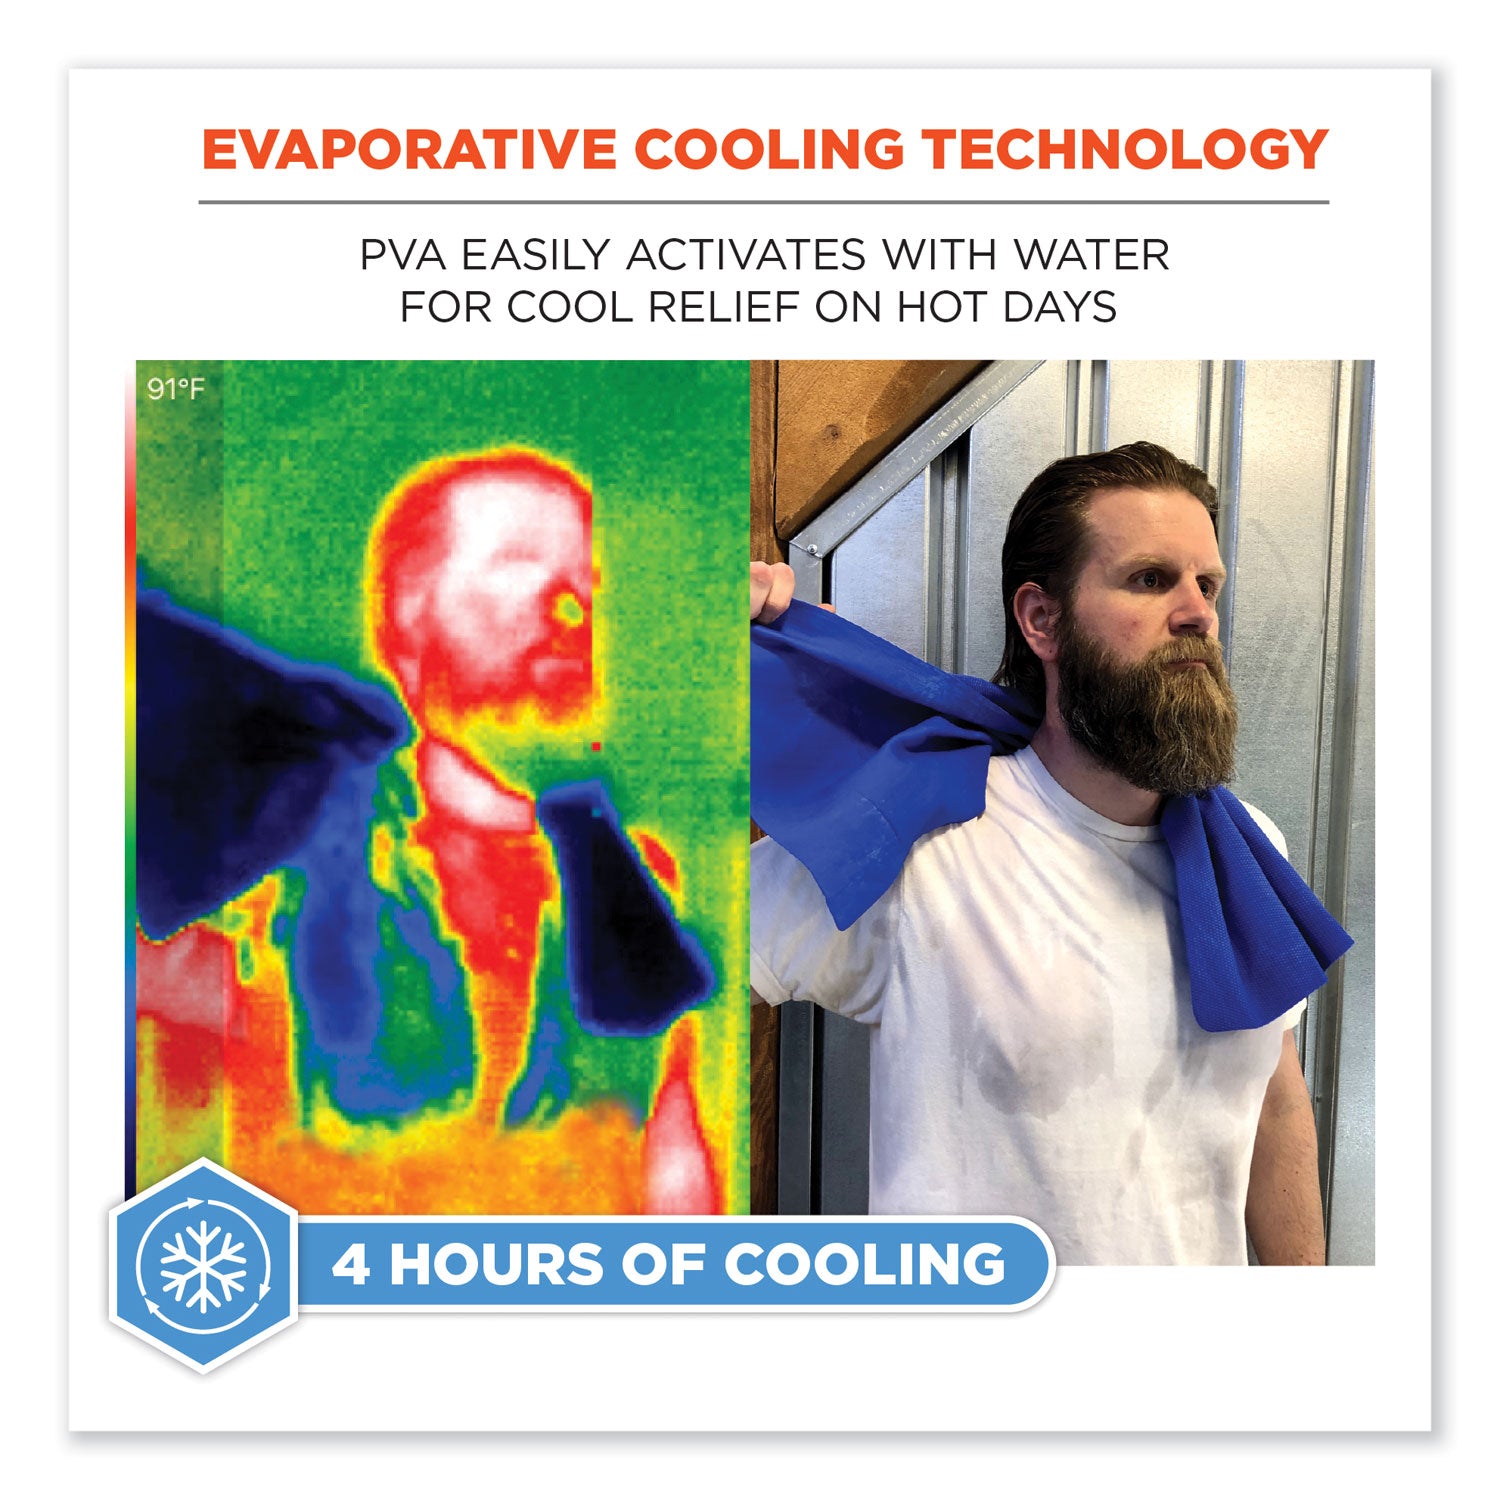 chill-its-6602-evaporative-pva-cooling-towel-295-x-13-one-size-fits-most-pva-hi-vis-lime-ships-in-1-3-business-days_ego12439 - 2